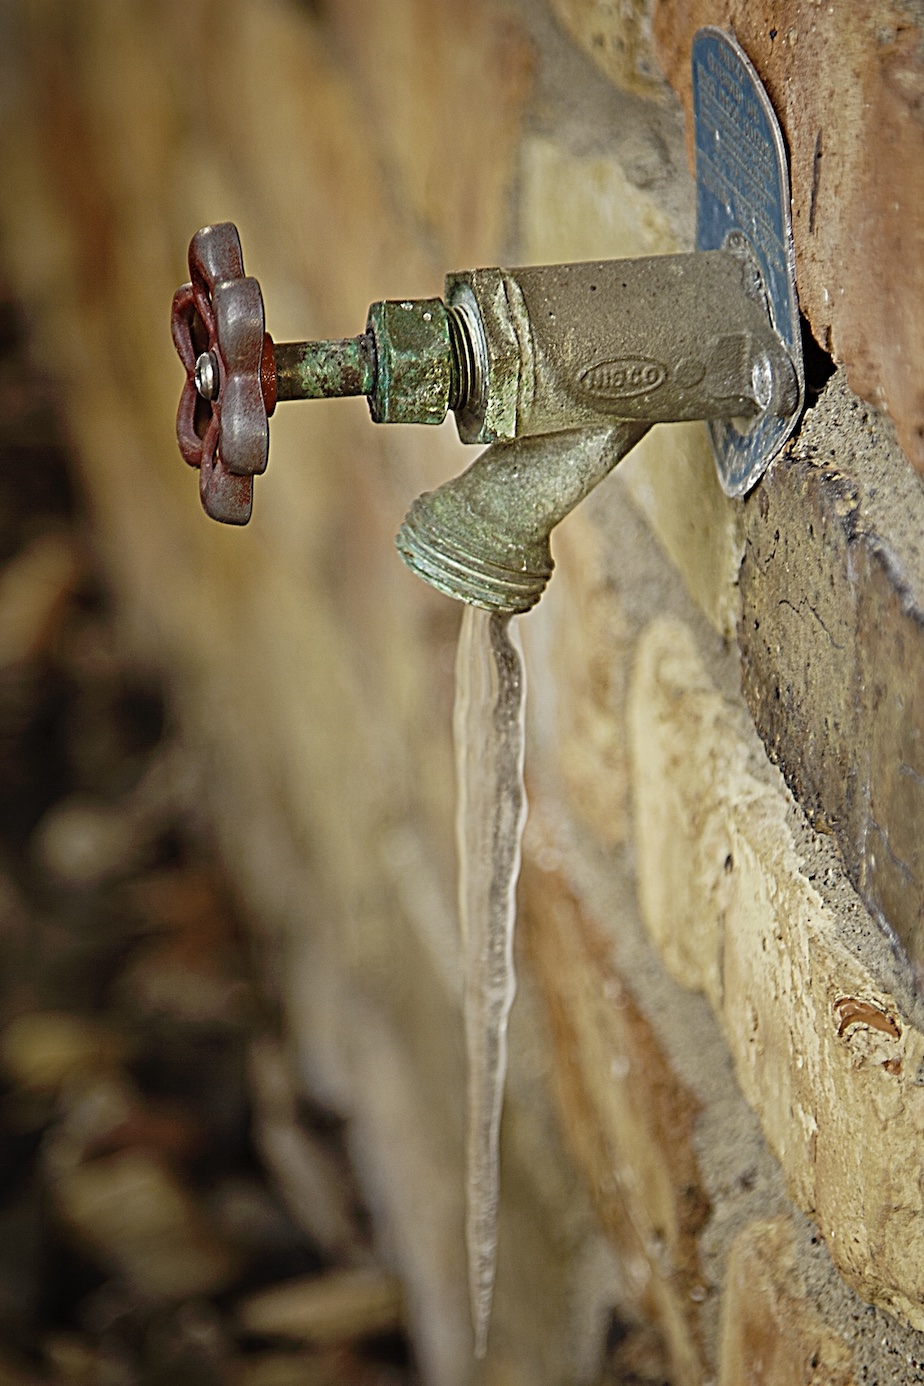 Frozen outdoor tap; image from Rawpixel.com, CCO Public Domain.